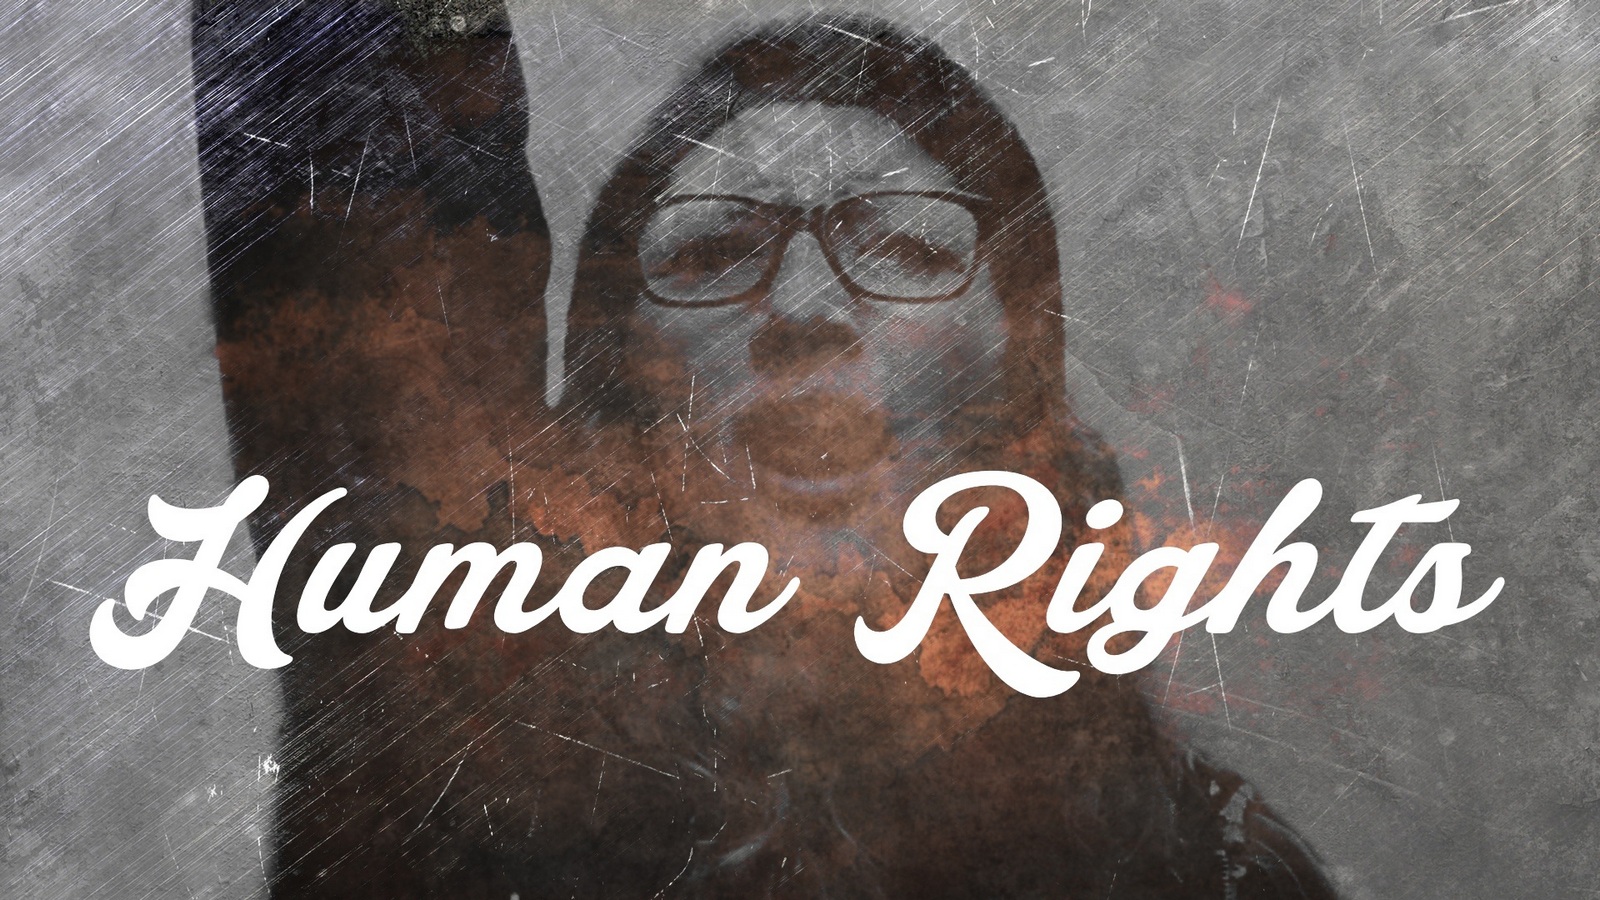 What are “human rights”?